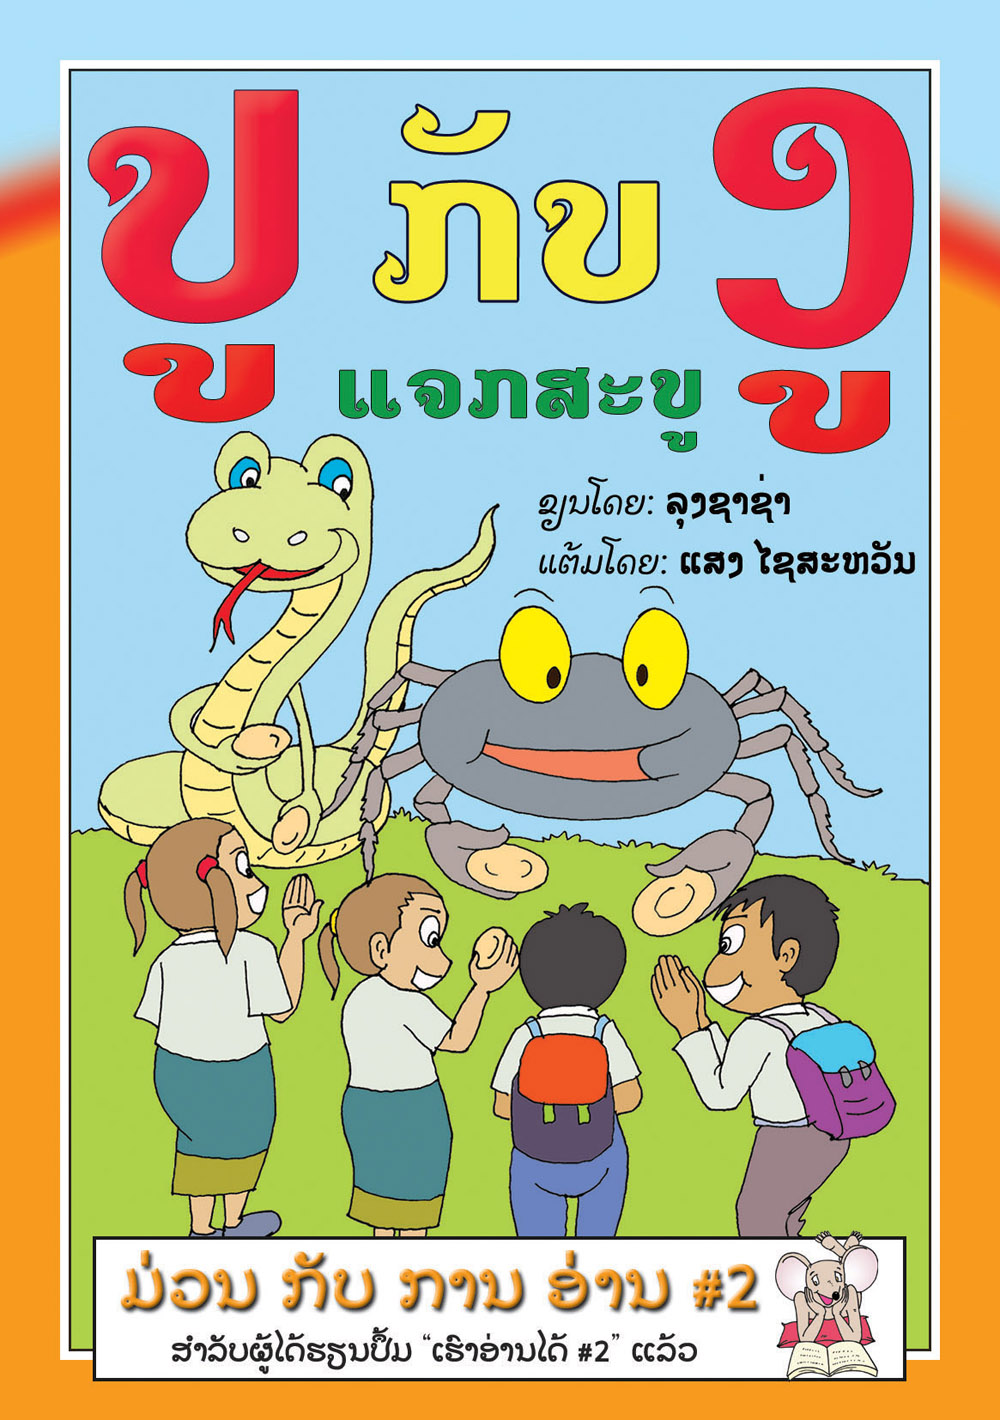 Crab and Snake Pass Out Soap large book cover, published in Lao language